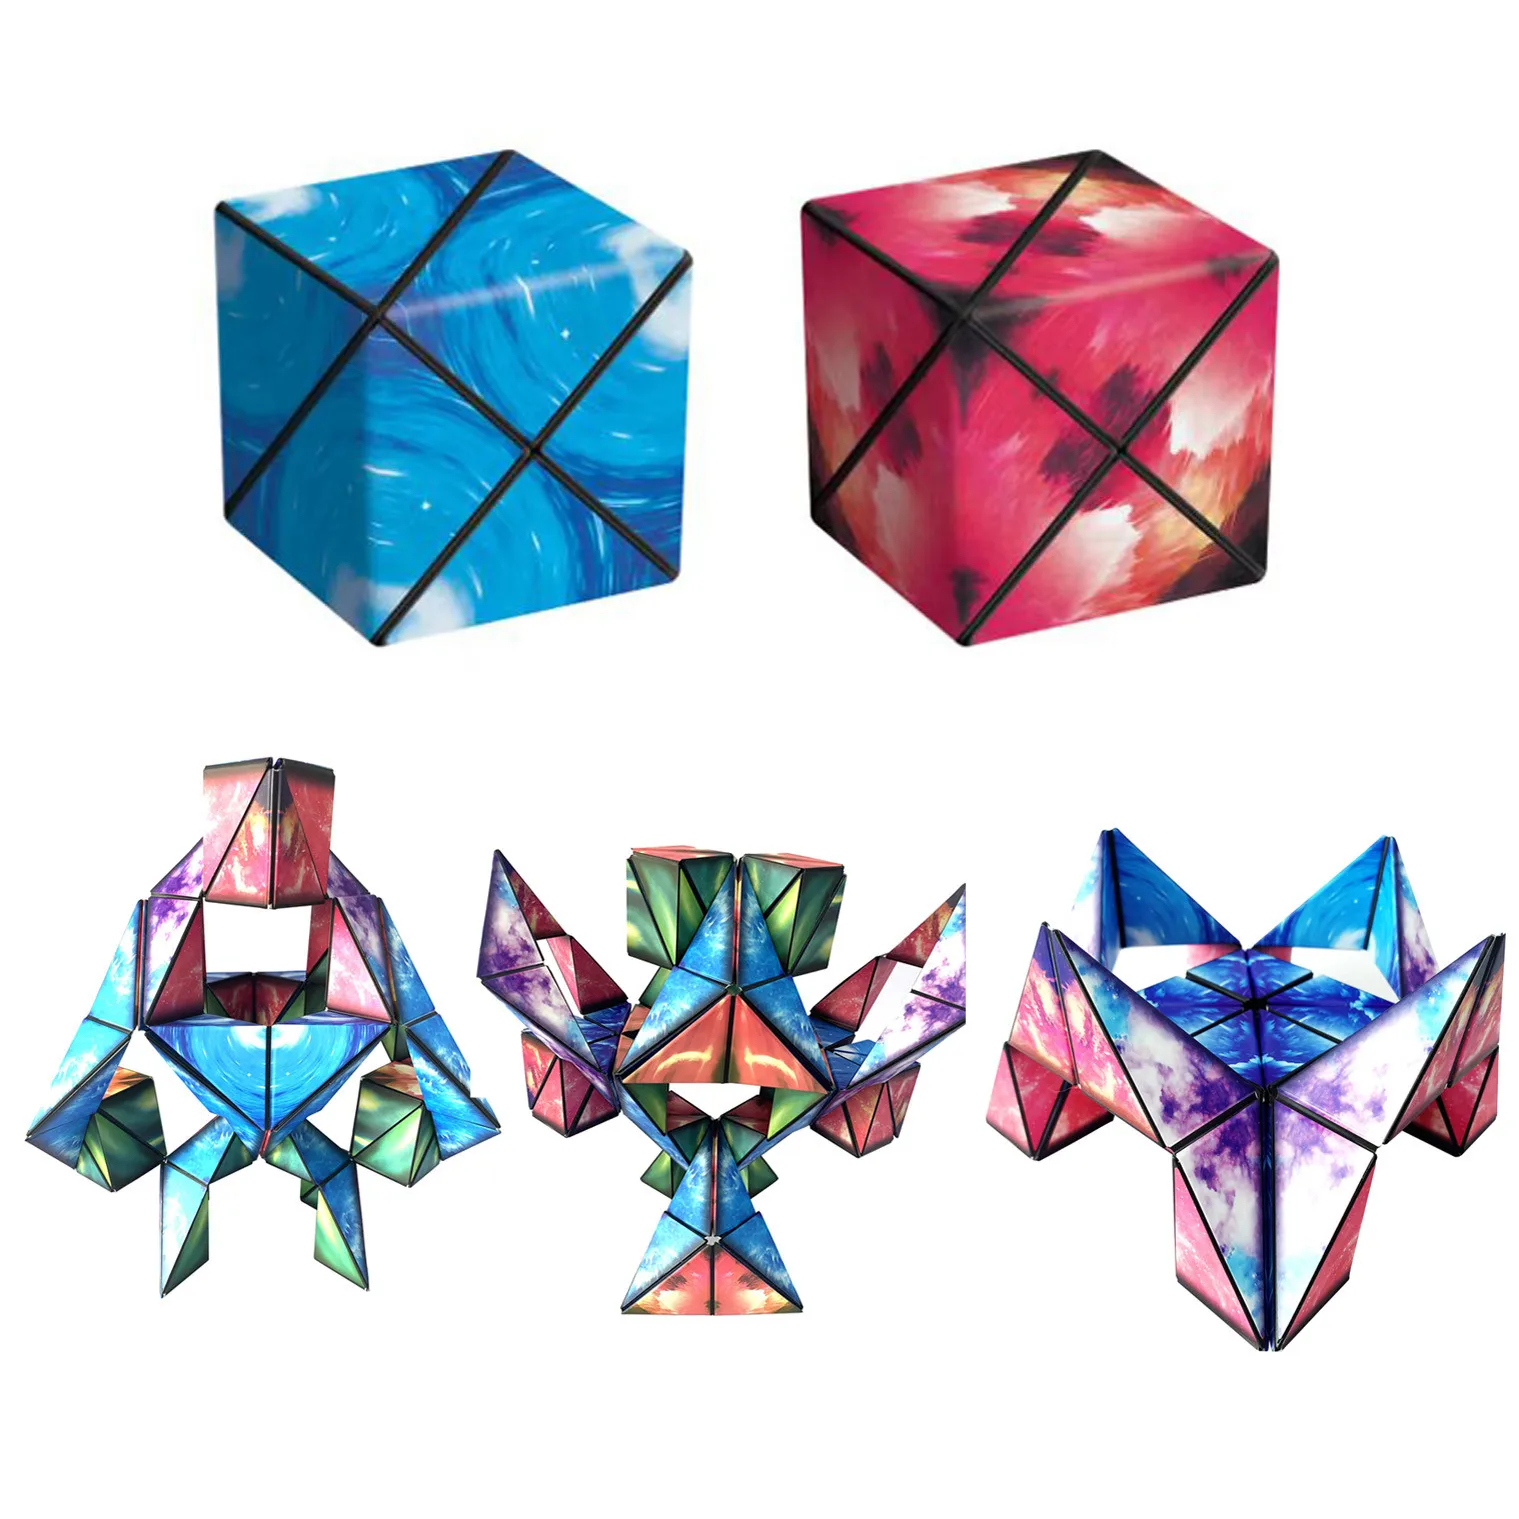 

Variety Geometric Changeable Magnetic Magic Cube Anti Stress 3d Decompression Hand Flip Puzzle Cube Kids Reliever Fidget Toy